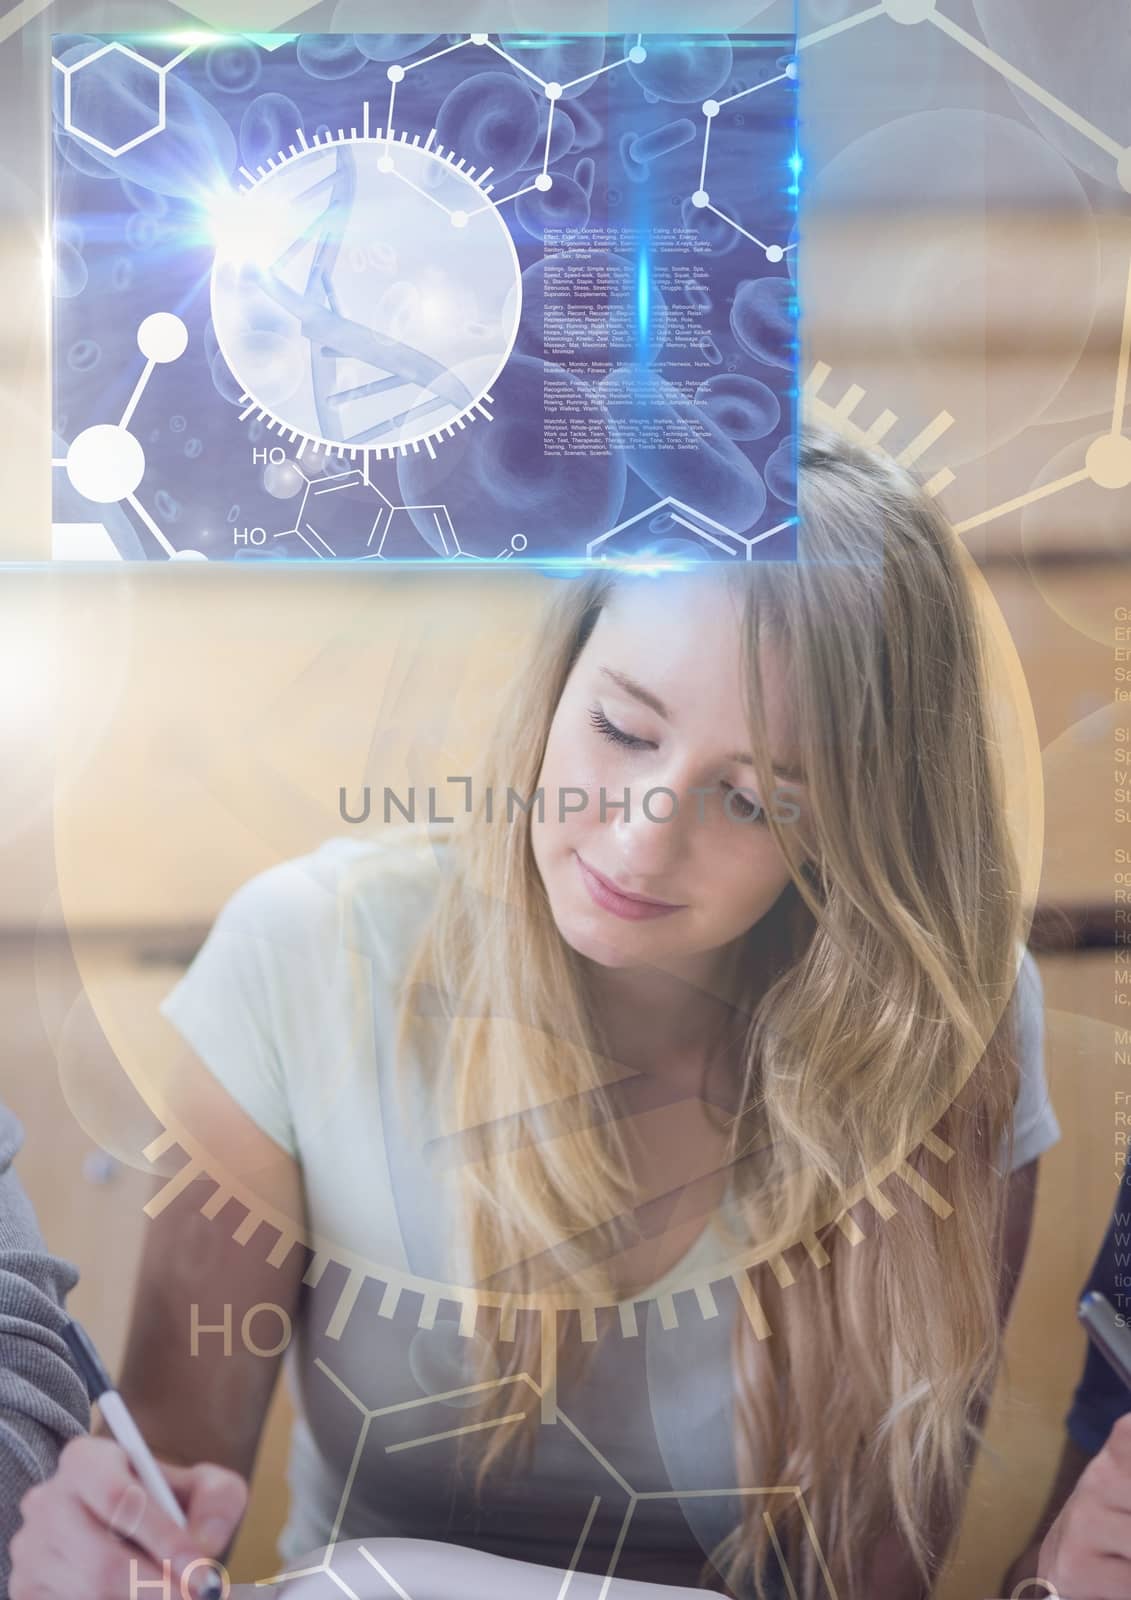 Digital composite of Female Student studying with notes and science education interface graphics overlay